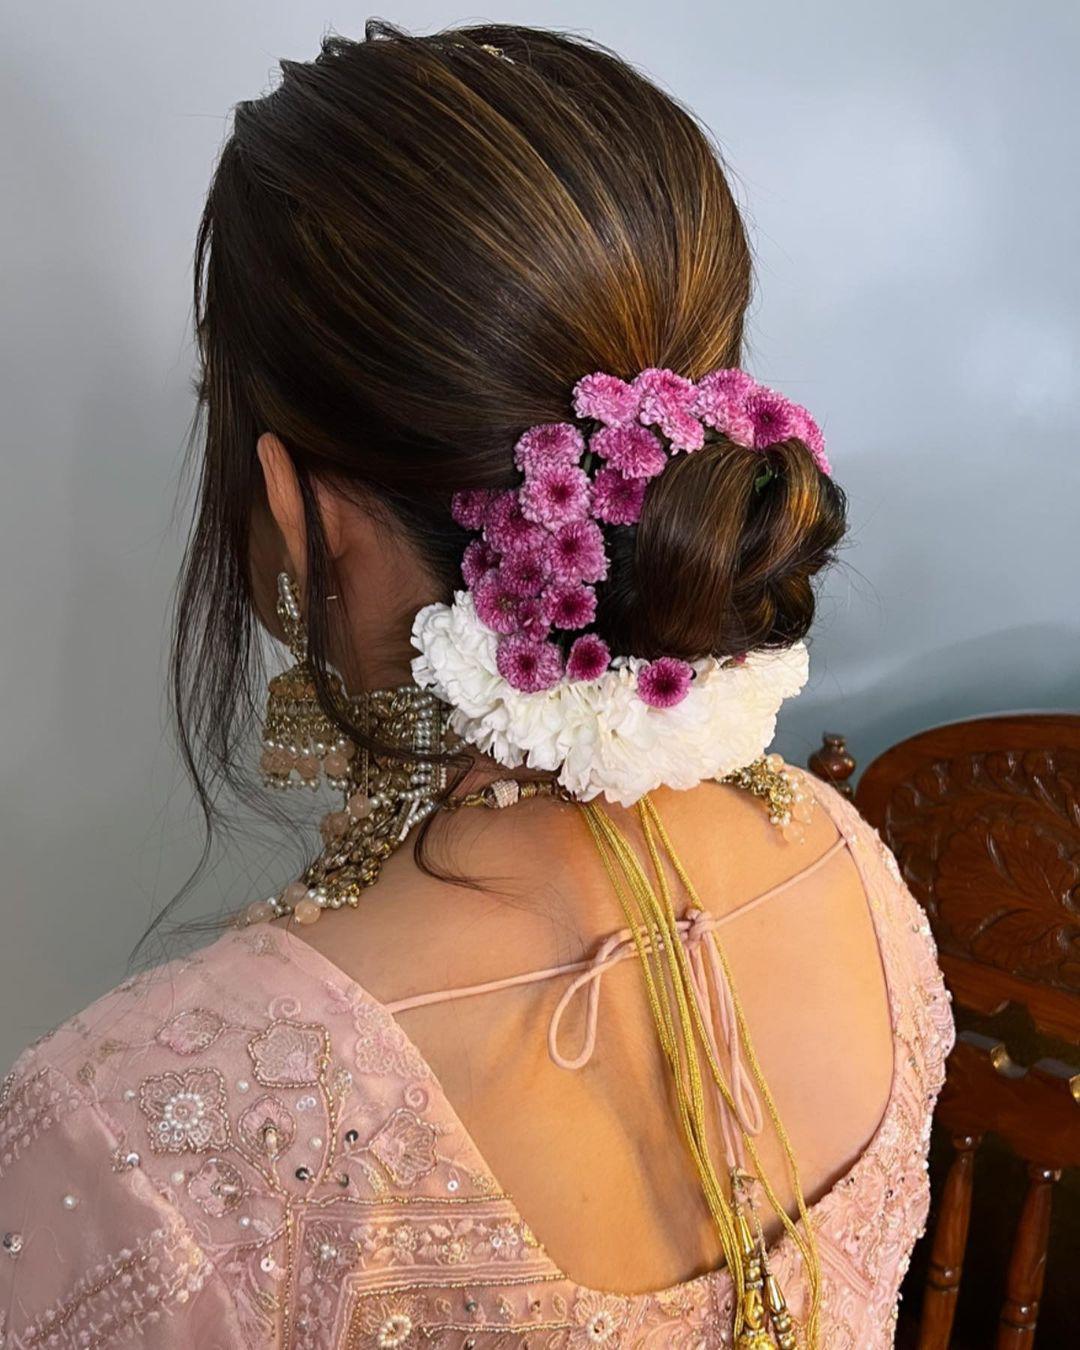 18 Sweet Flower Girl Hairstyles + Hair Accessories She'll Love